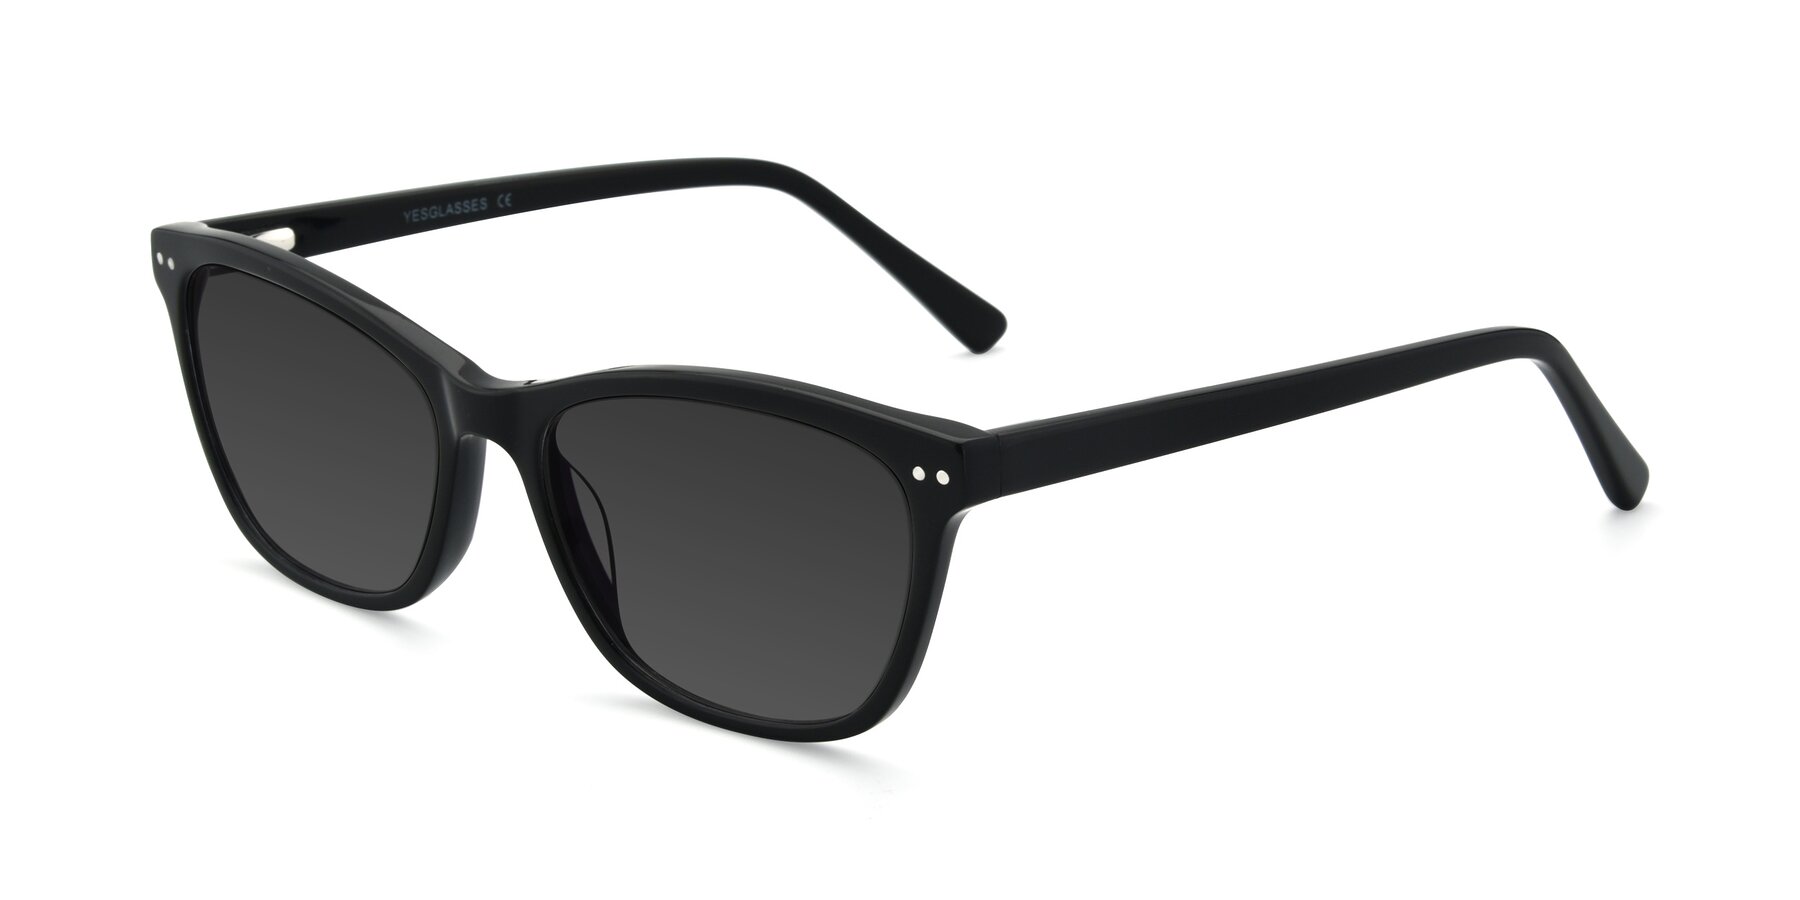 Angle of 17350 in Black with Gray Tinted Lenses